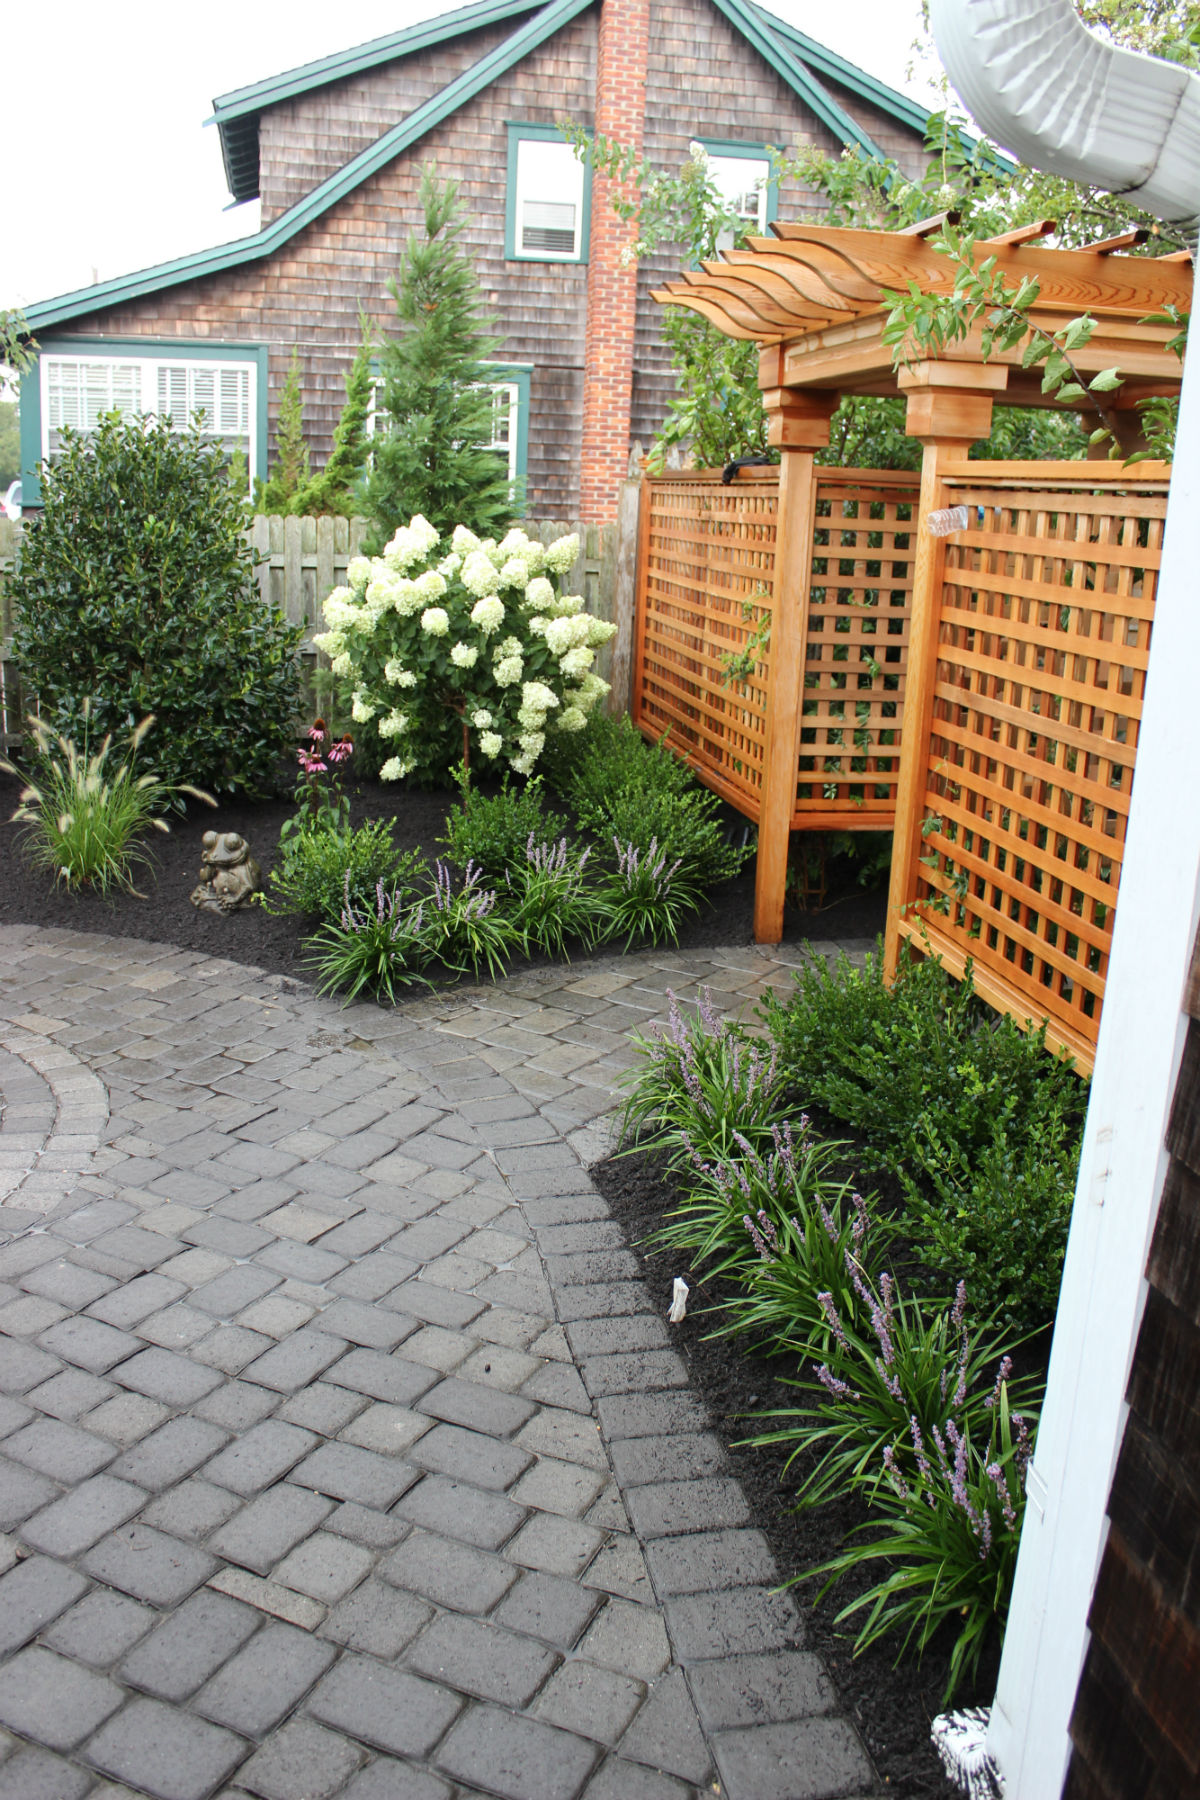 Hardscape Design Can Enhance Your Outdoor Space